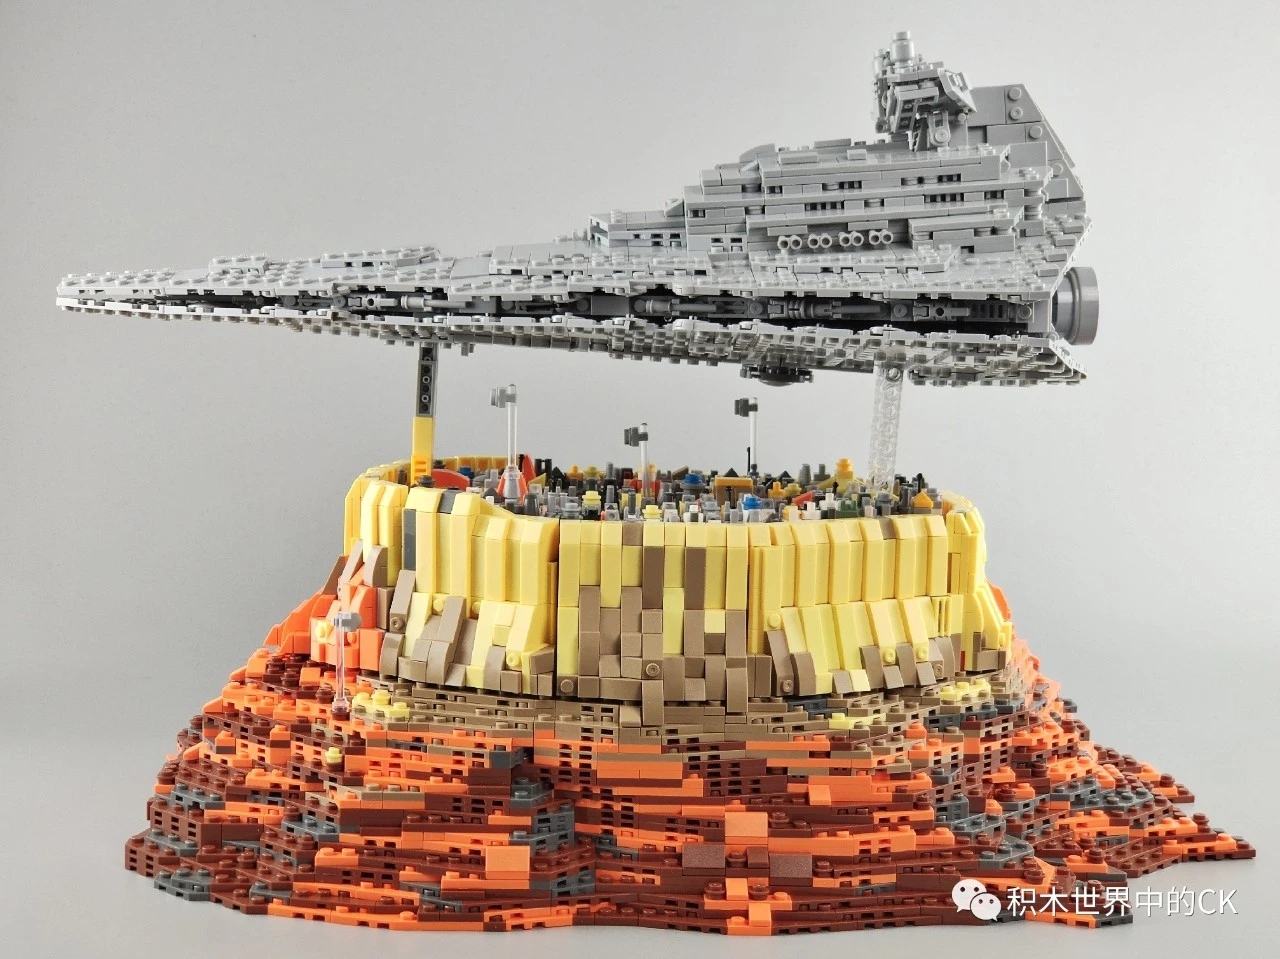 Reviews of Qizhile 90007 The Empire Over Jedha City LEGO MOC 18916 